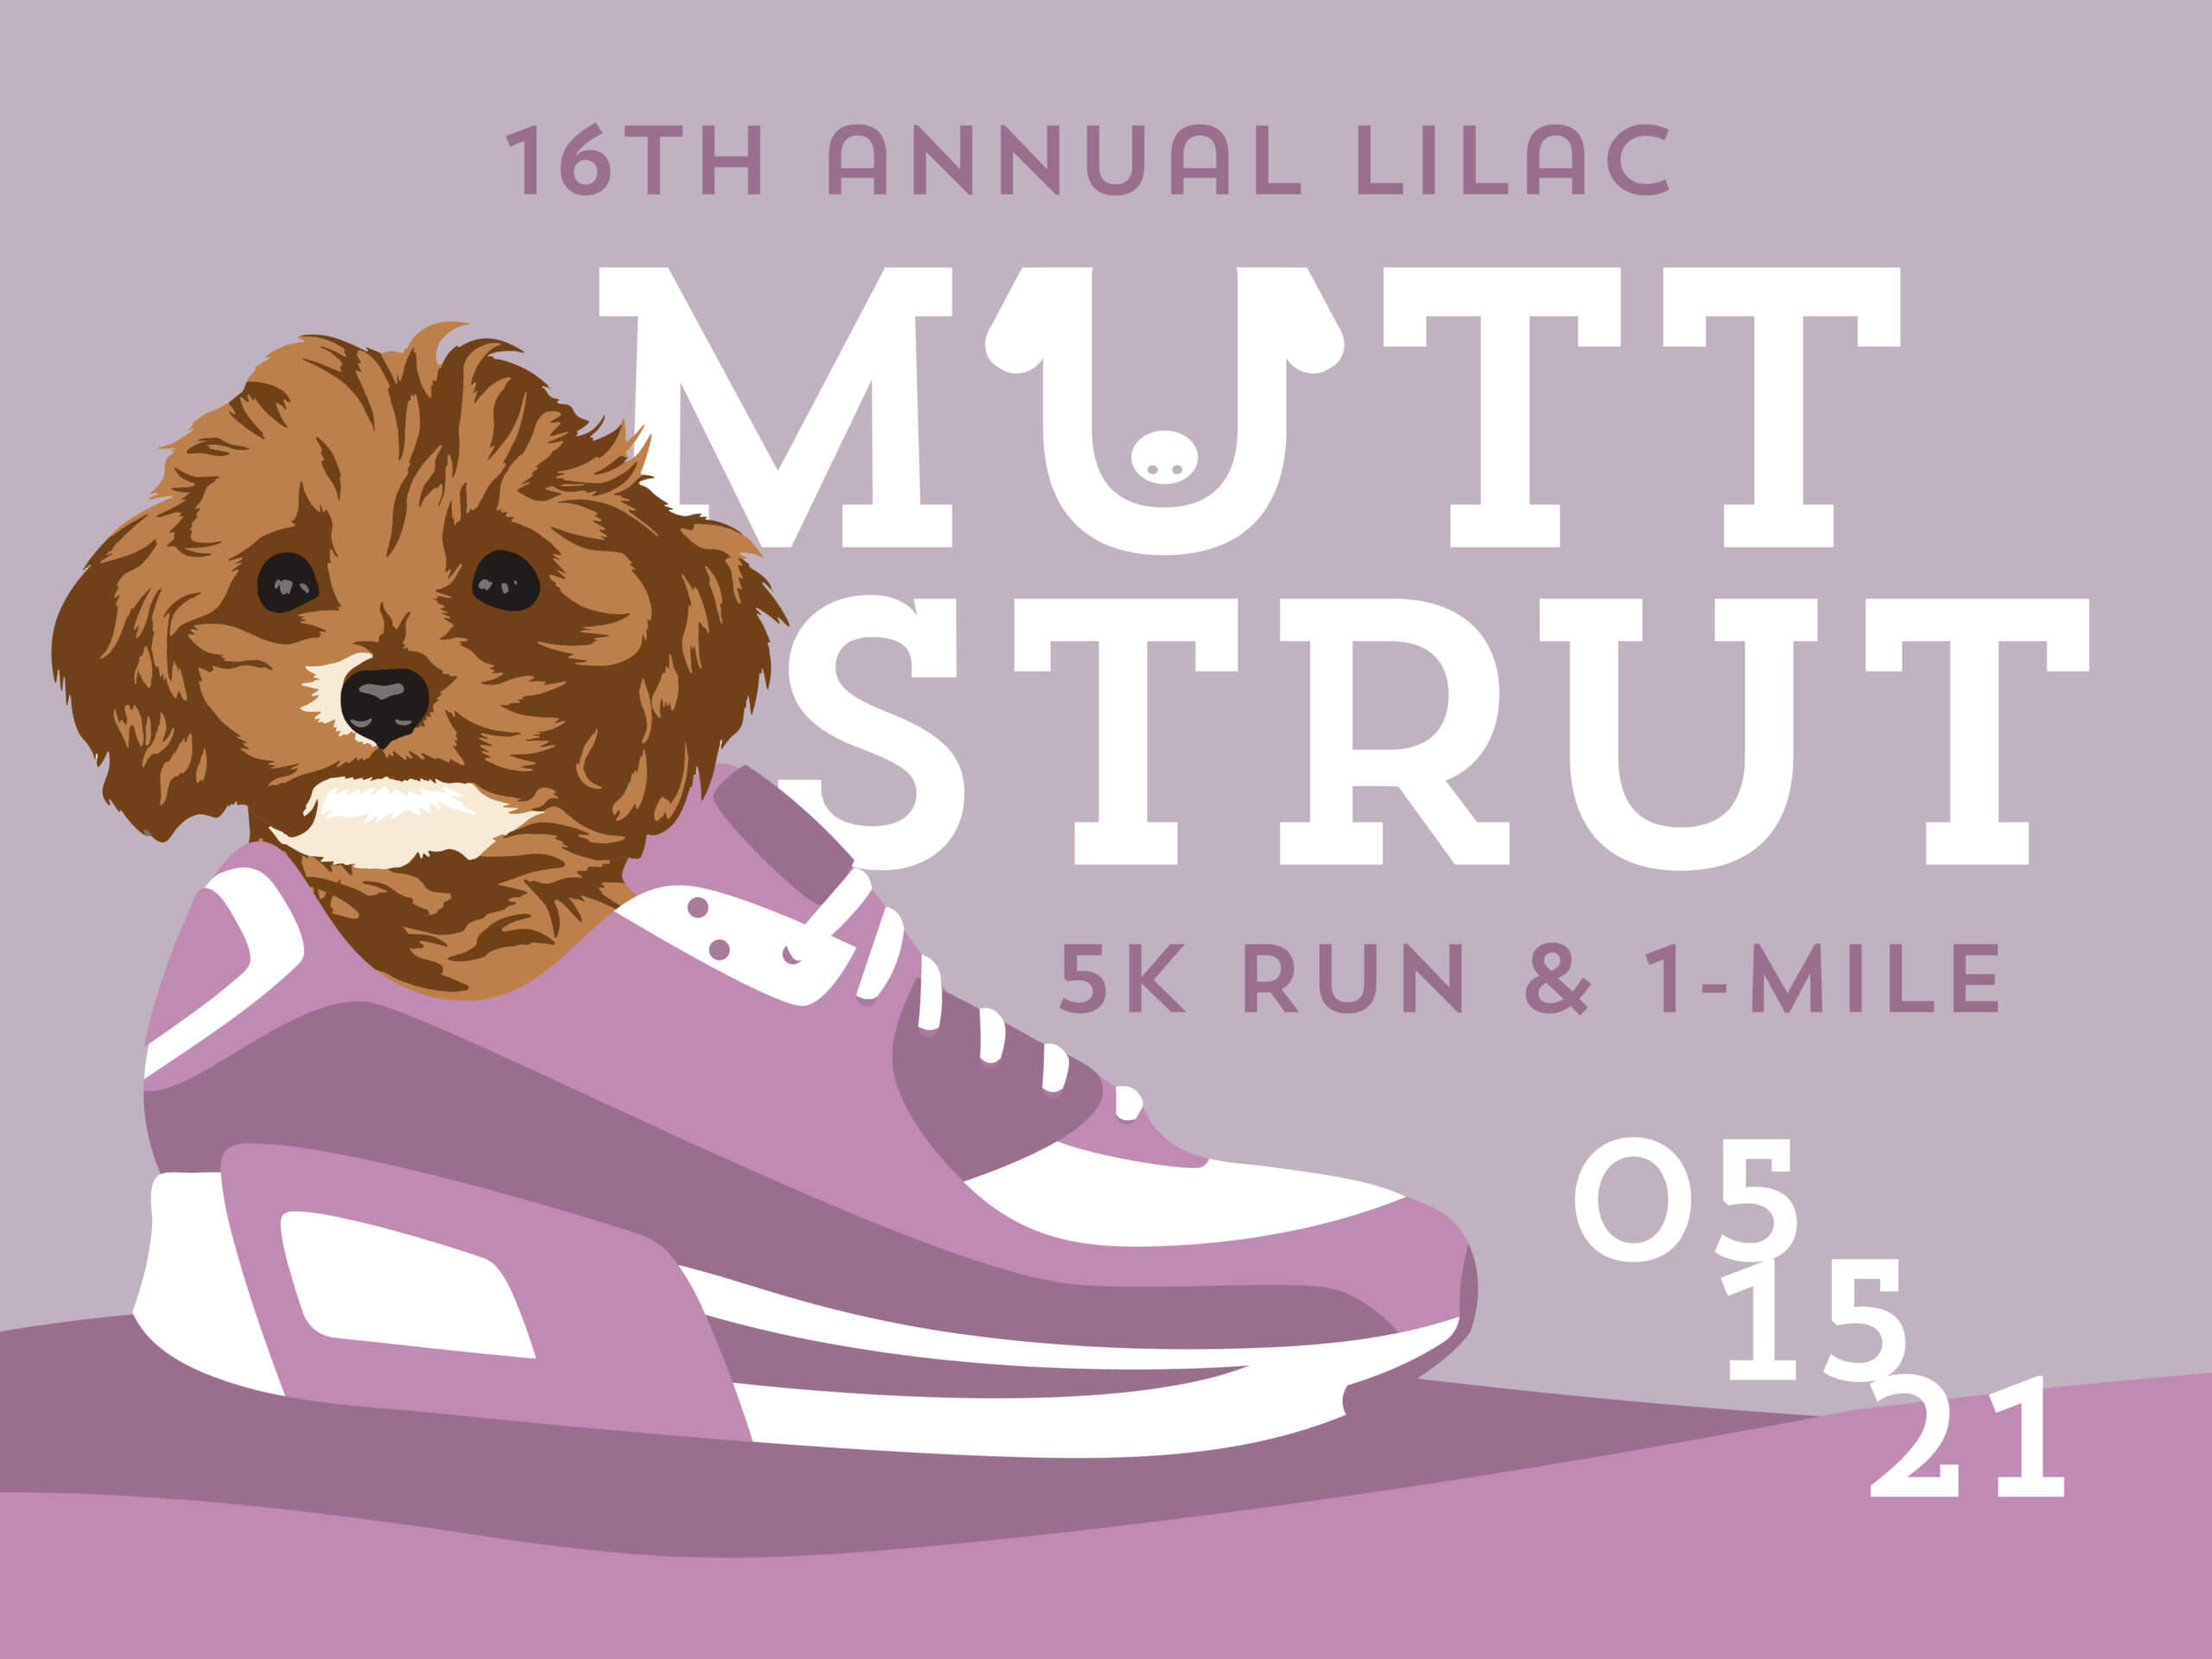 Mutt Strut takes place May 15th at 8AM